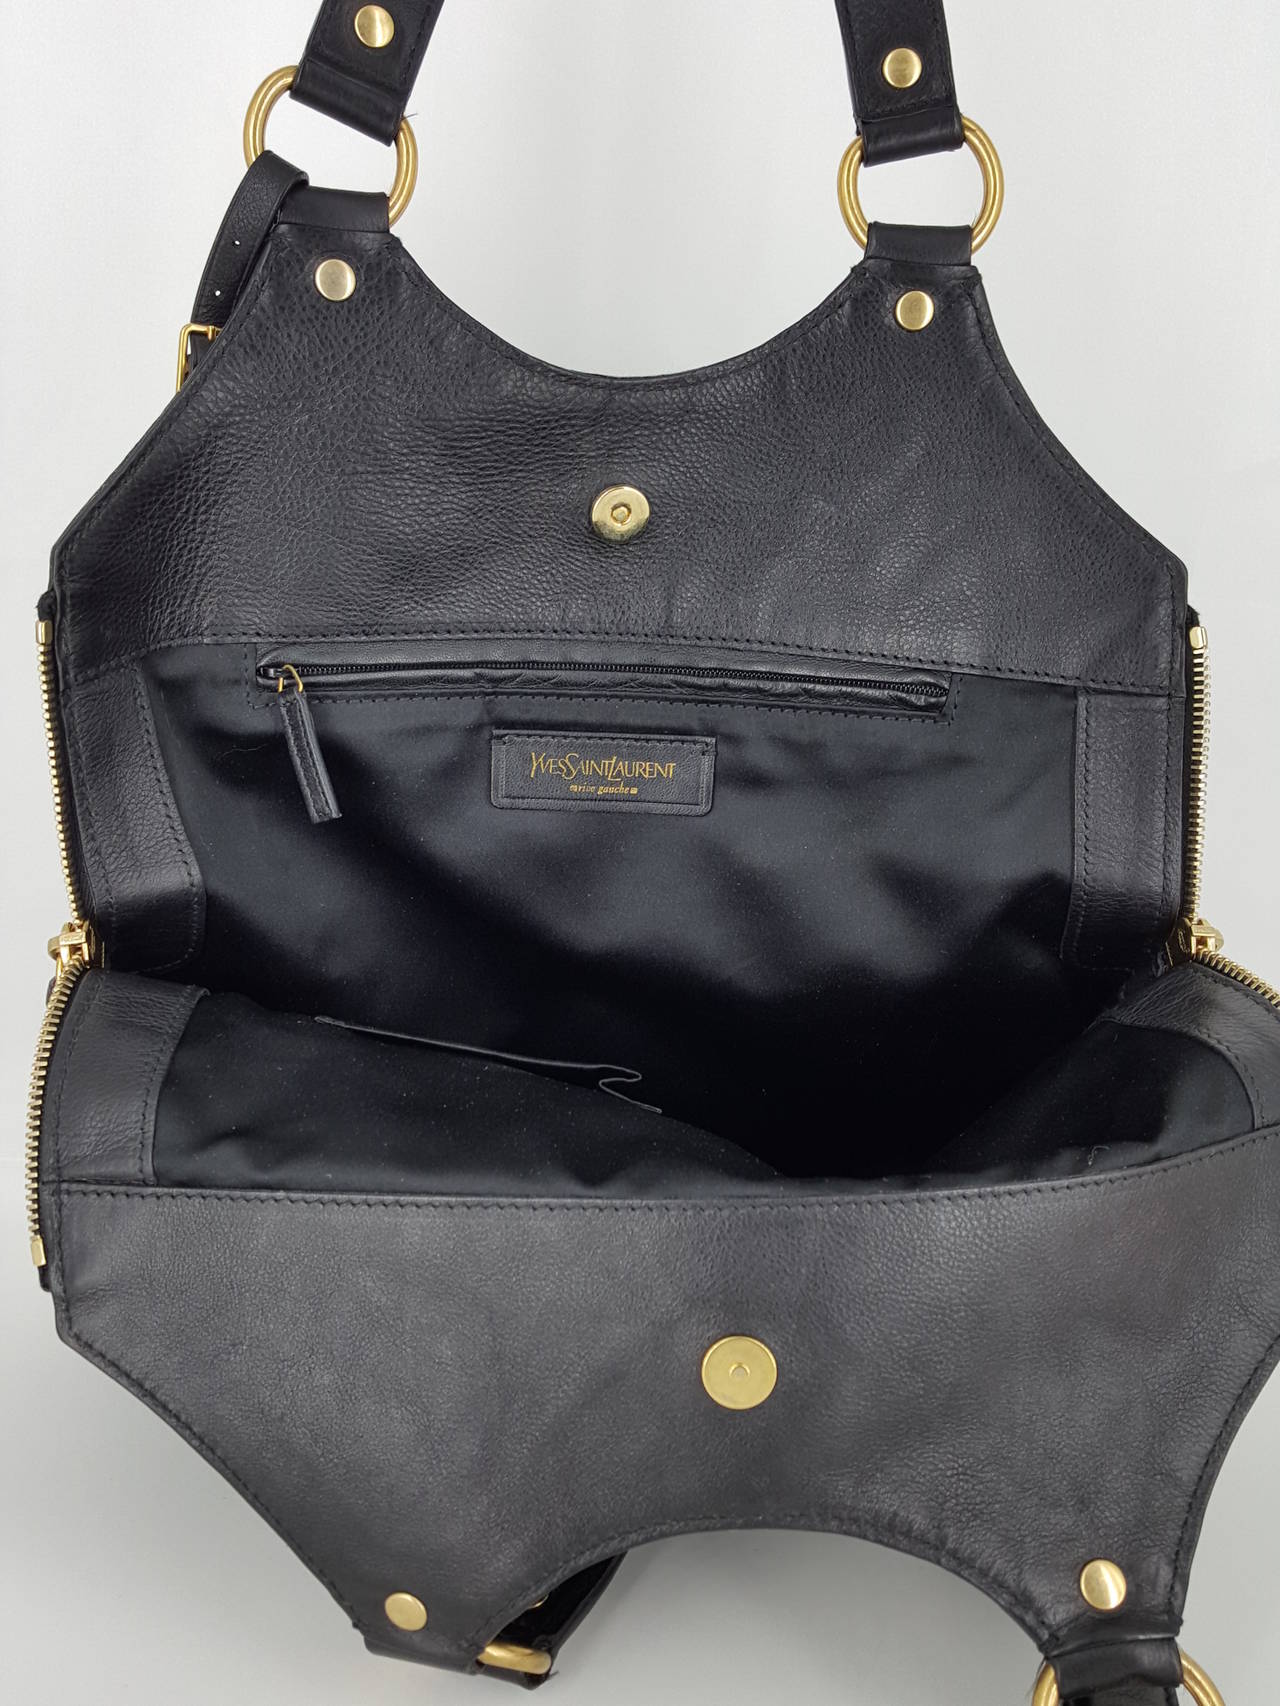 YSL Yves Saint Laurent Black Leather Tribute Bag. In Excellent Condition For Sale In Delray Beach, FL